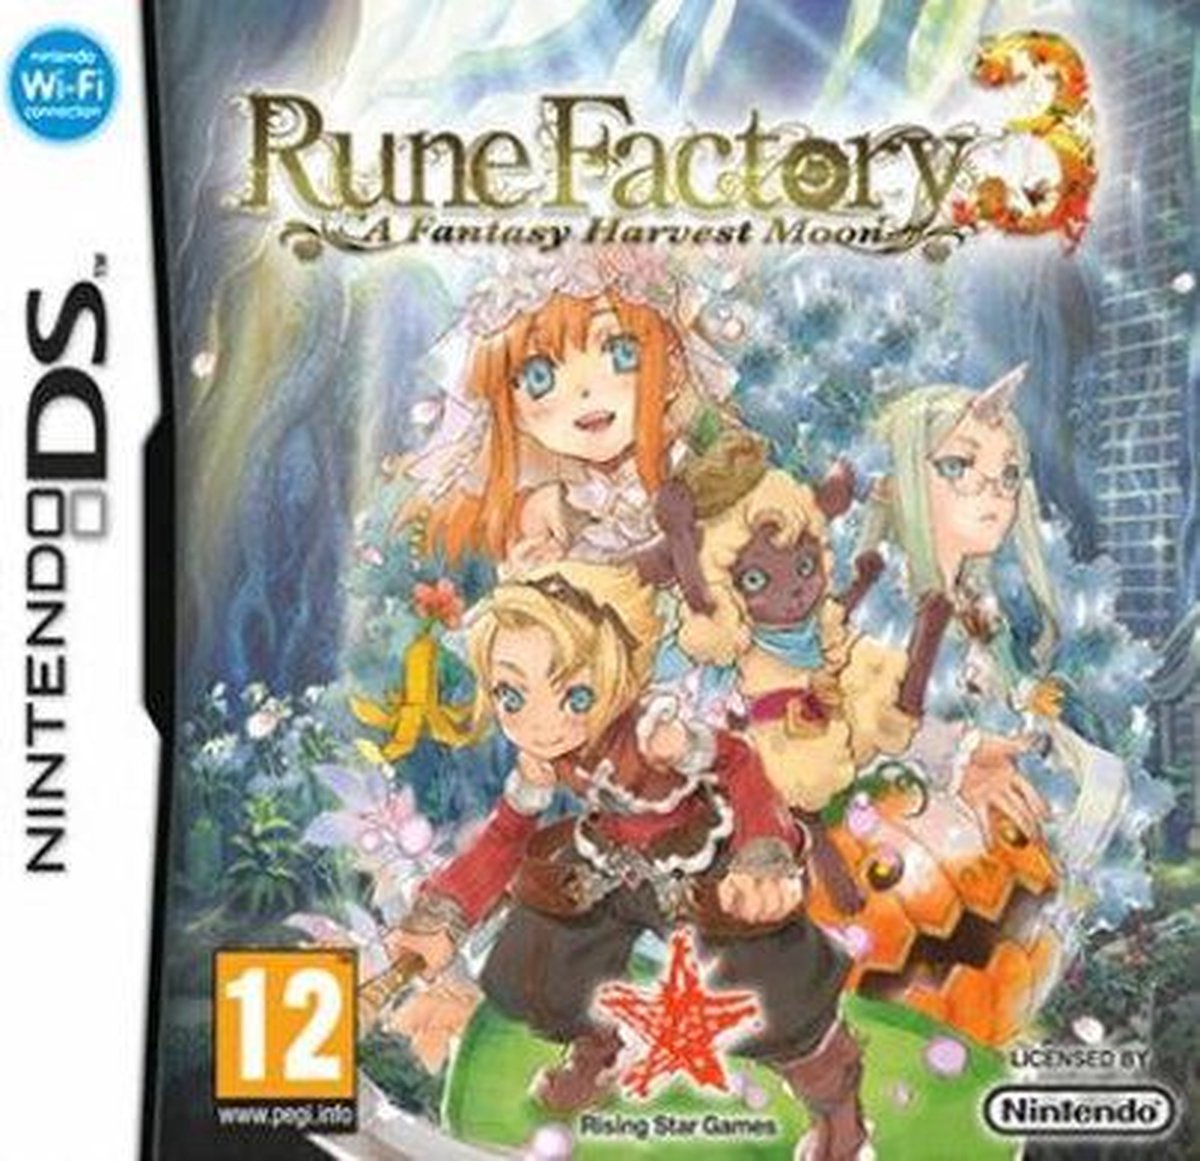 Rune factory 4 town events